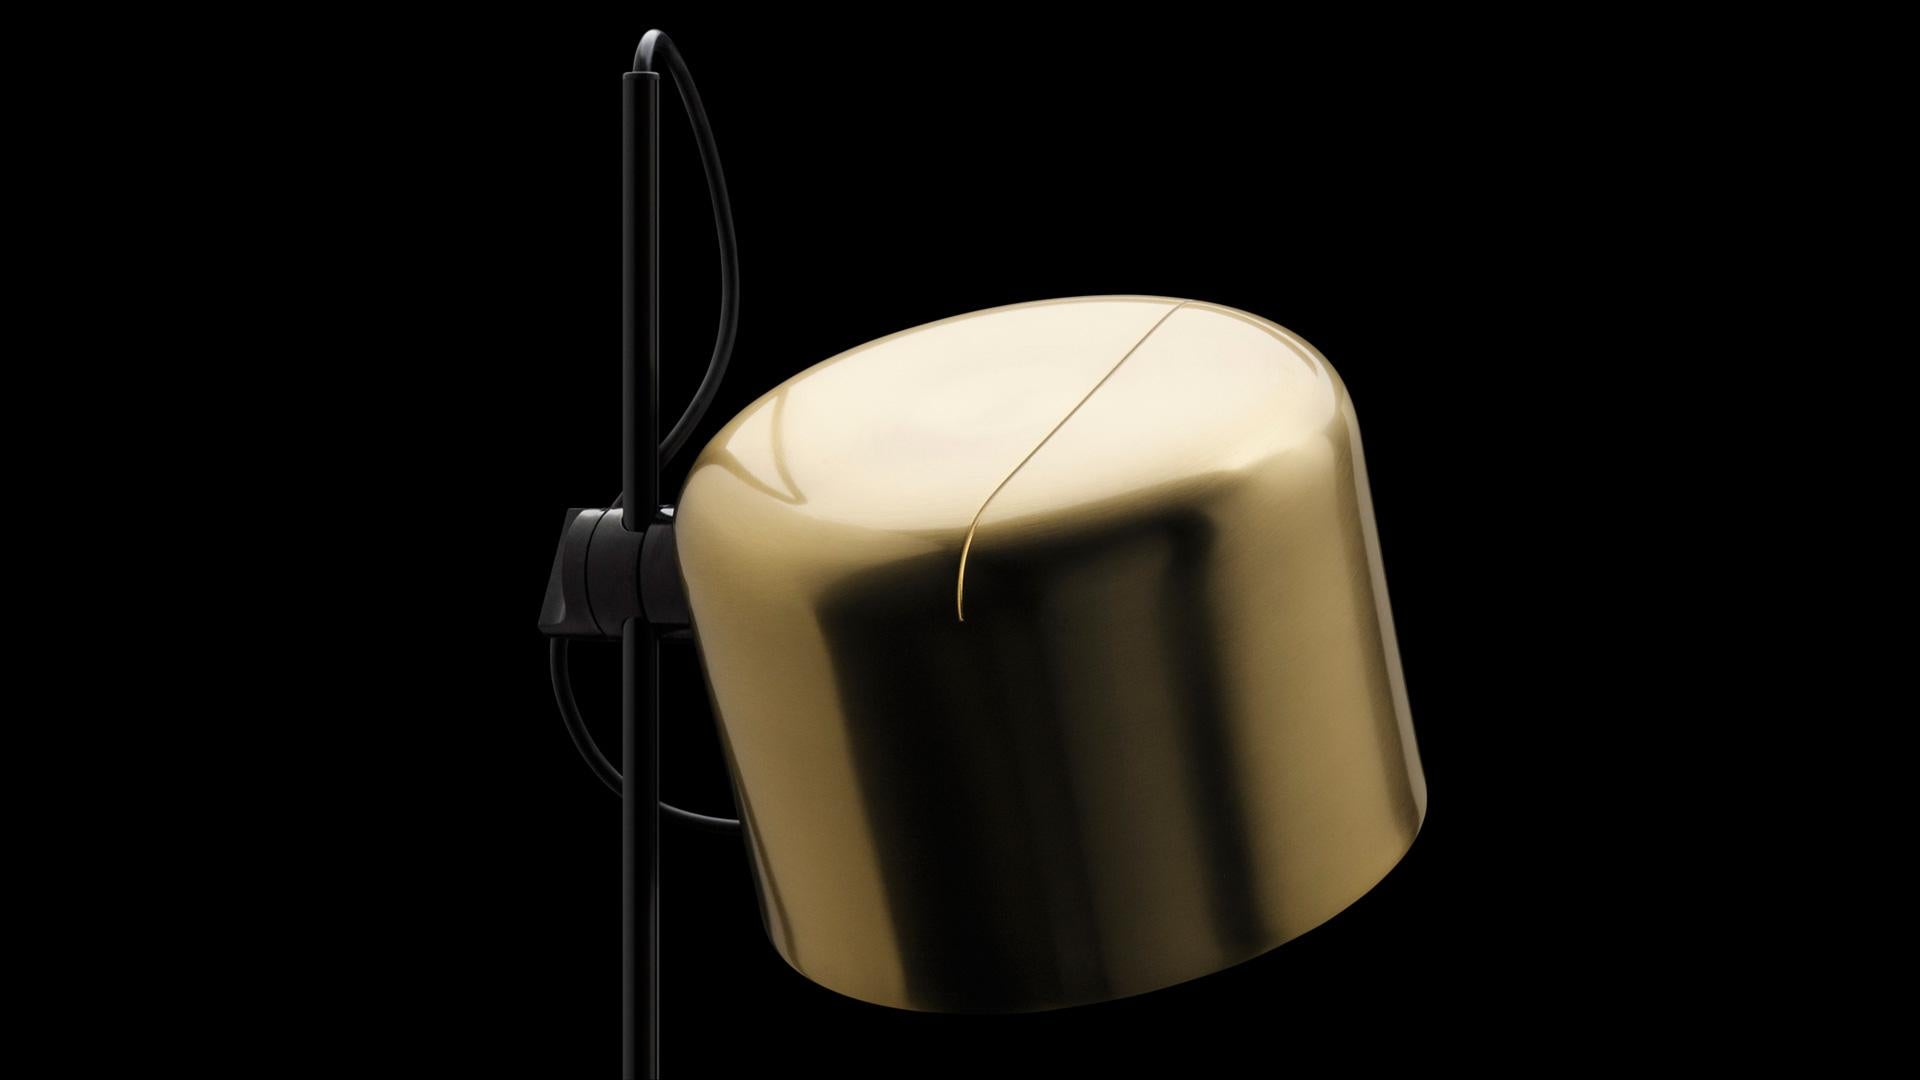 This Colombo lamp is included in the permanent collections of New York’s MoMA and the Neue Sammlung Museum in Munich.
To celebrate Coupé’s 50th anniversary, Oluce has created a special edition in Gold.

The new version of the classic floor lamp